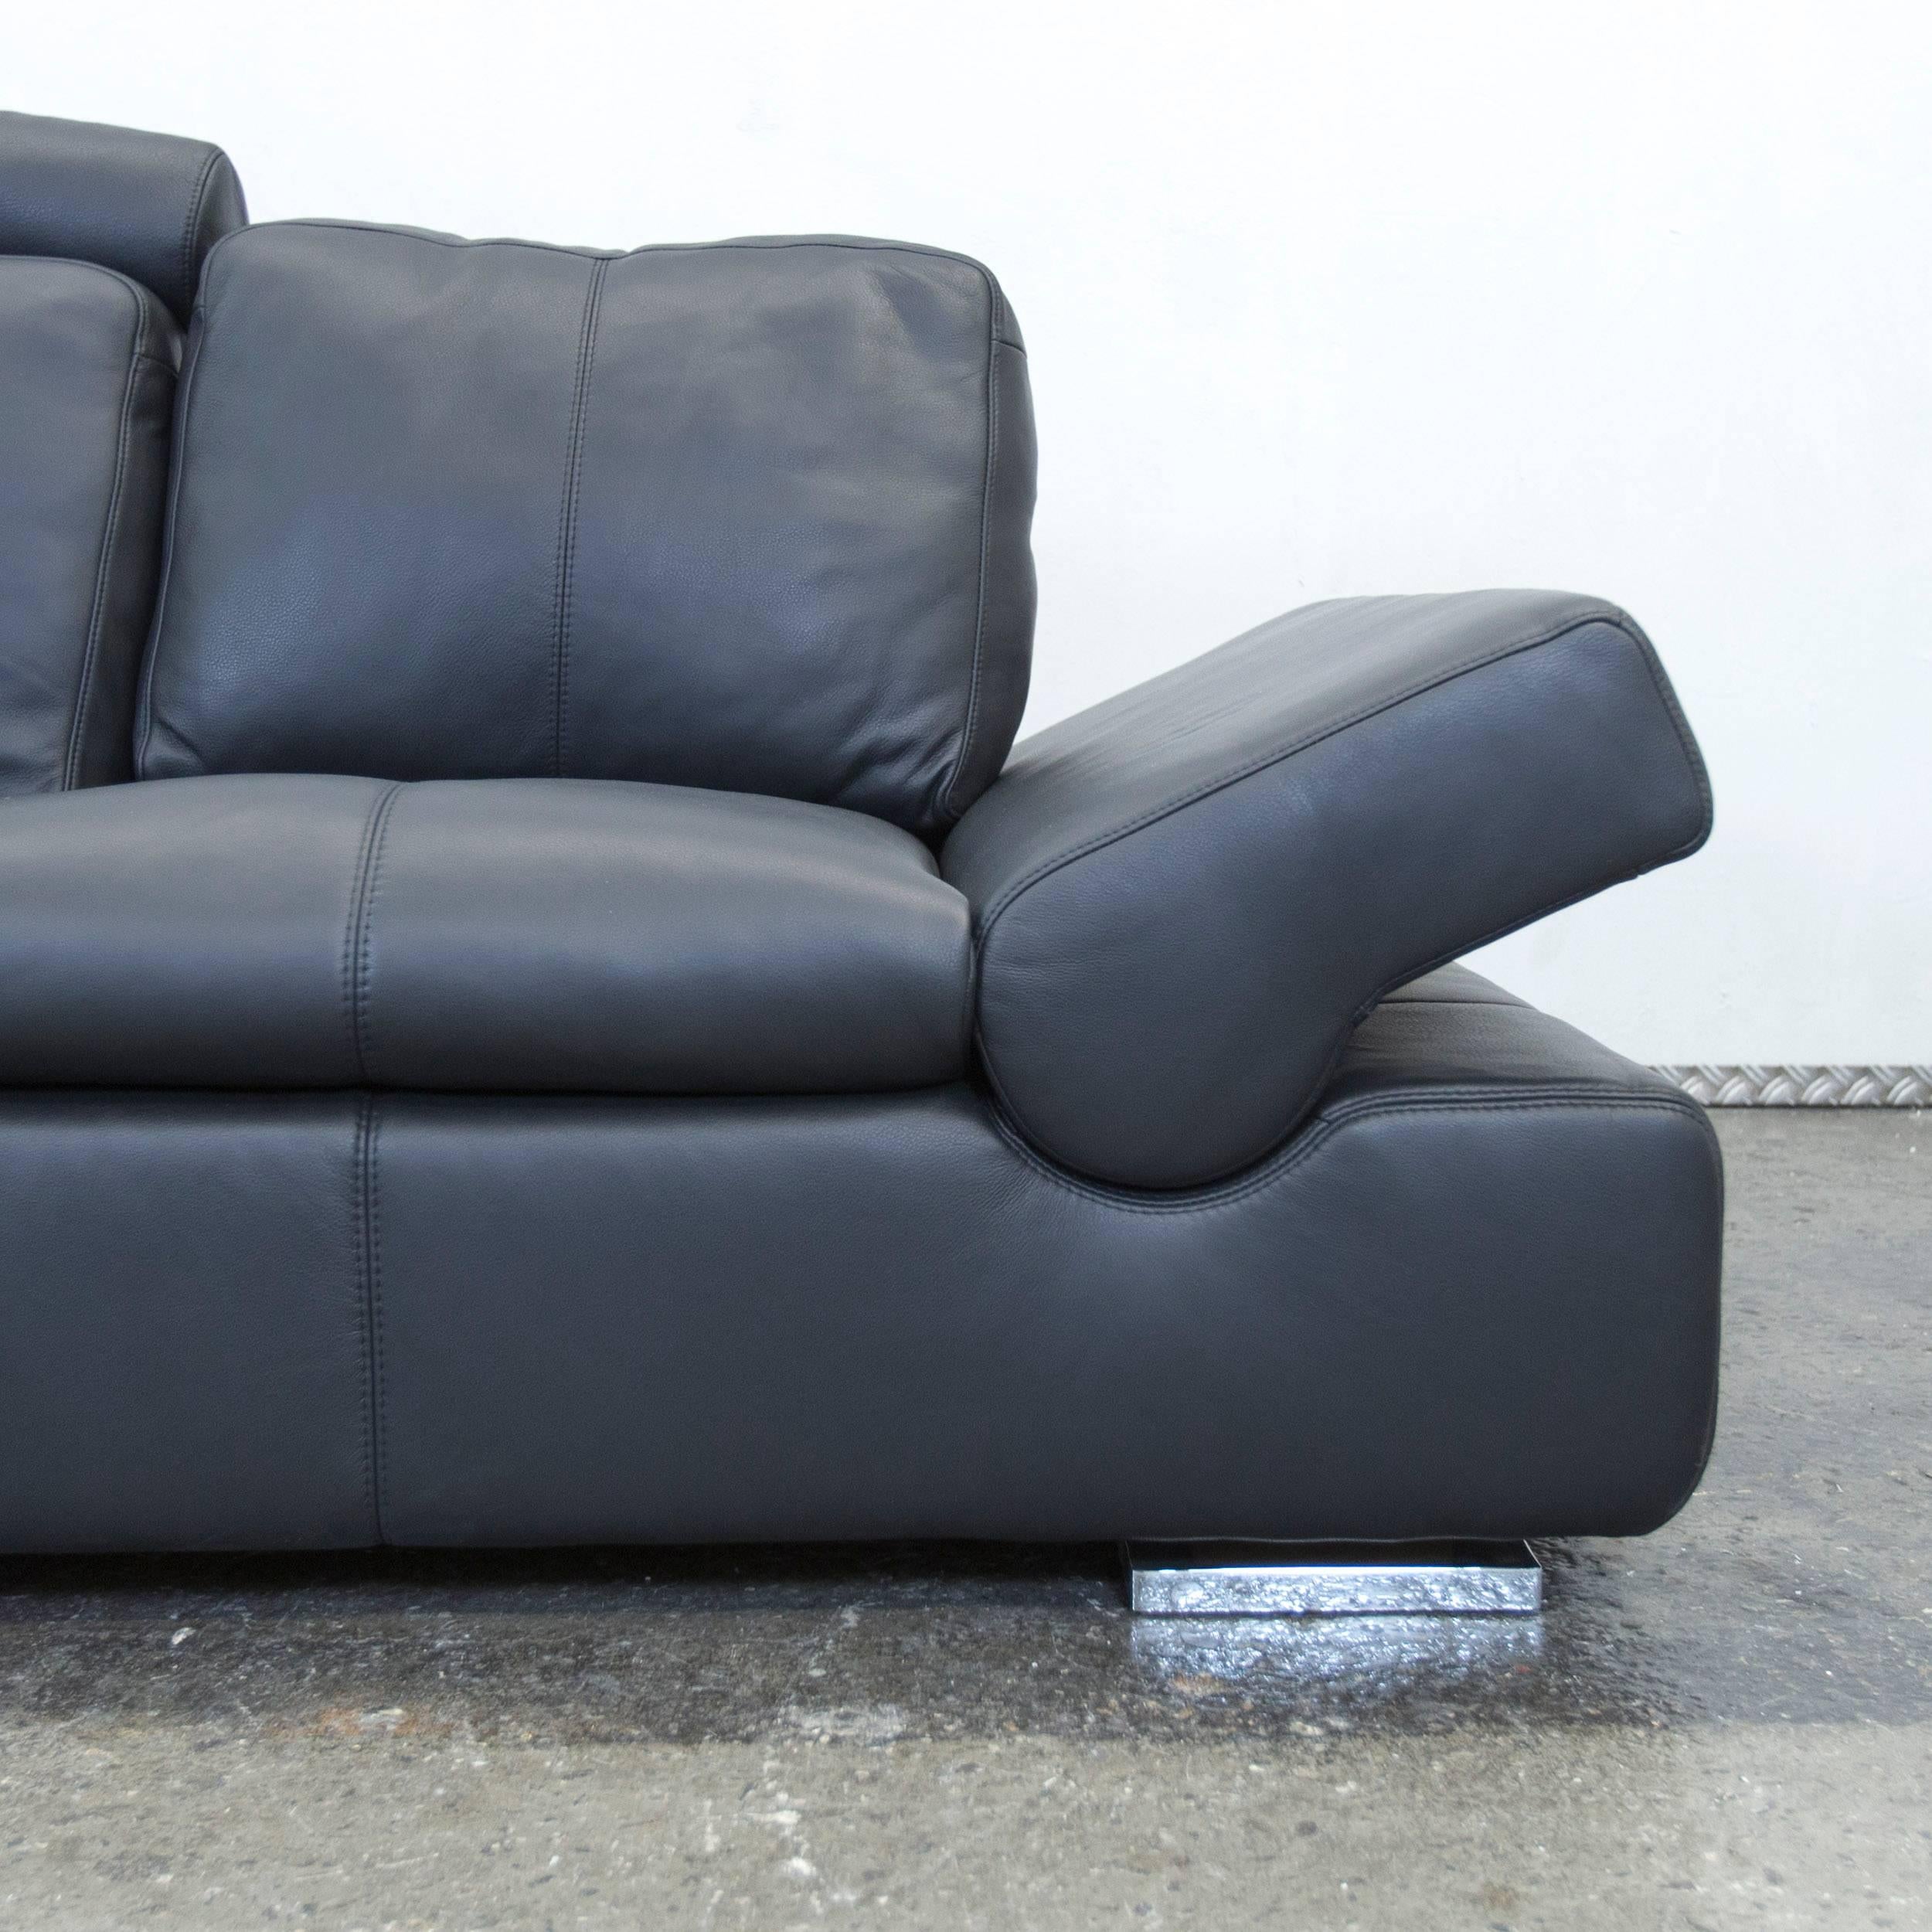 designer leather couch